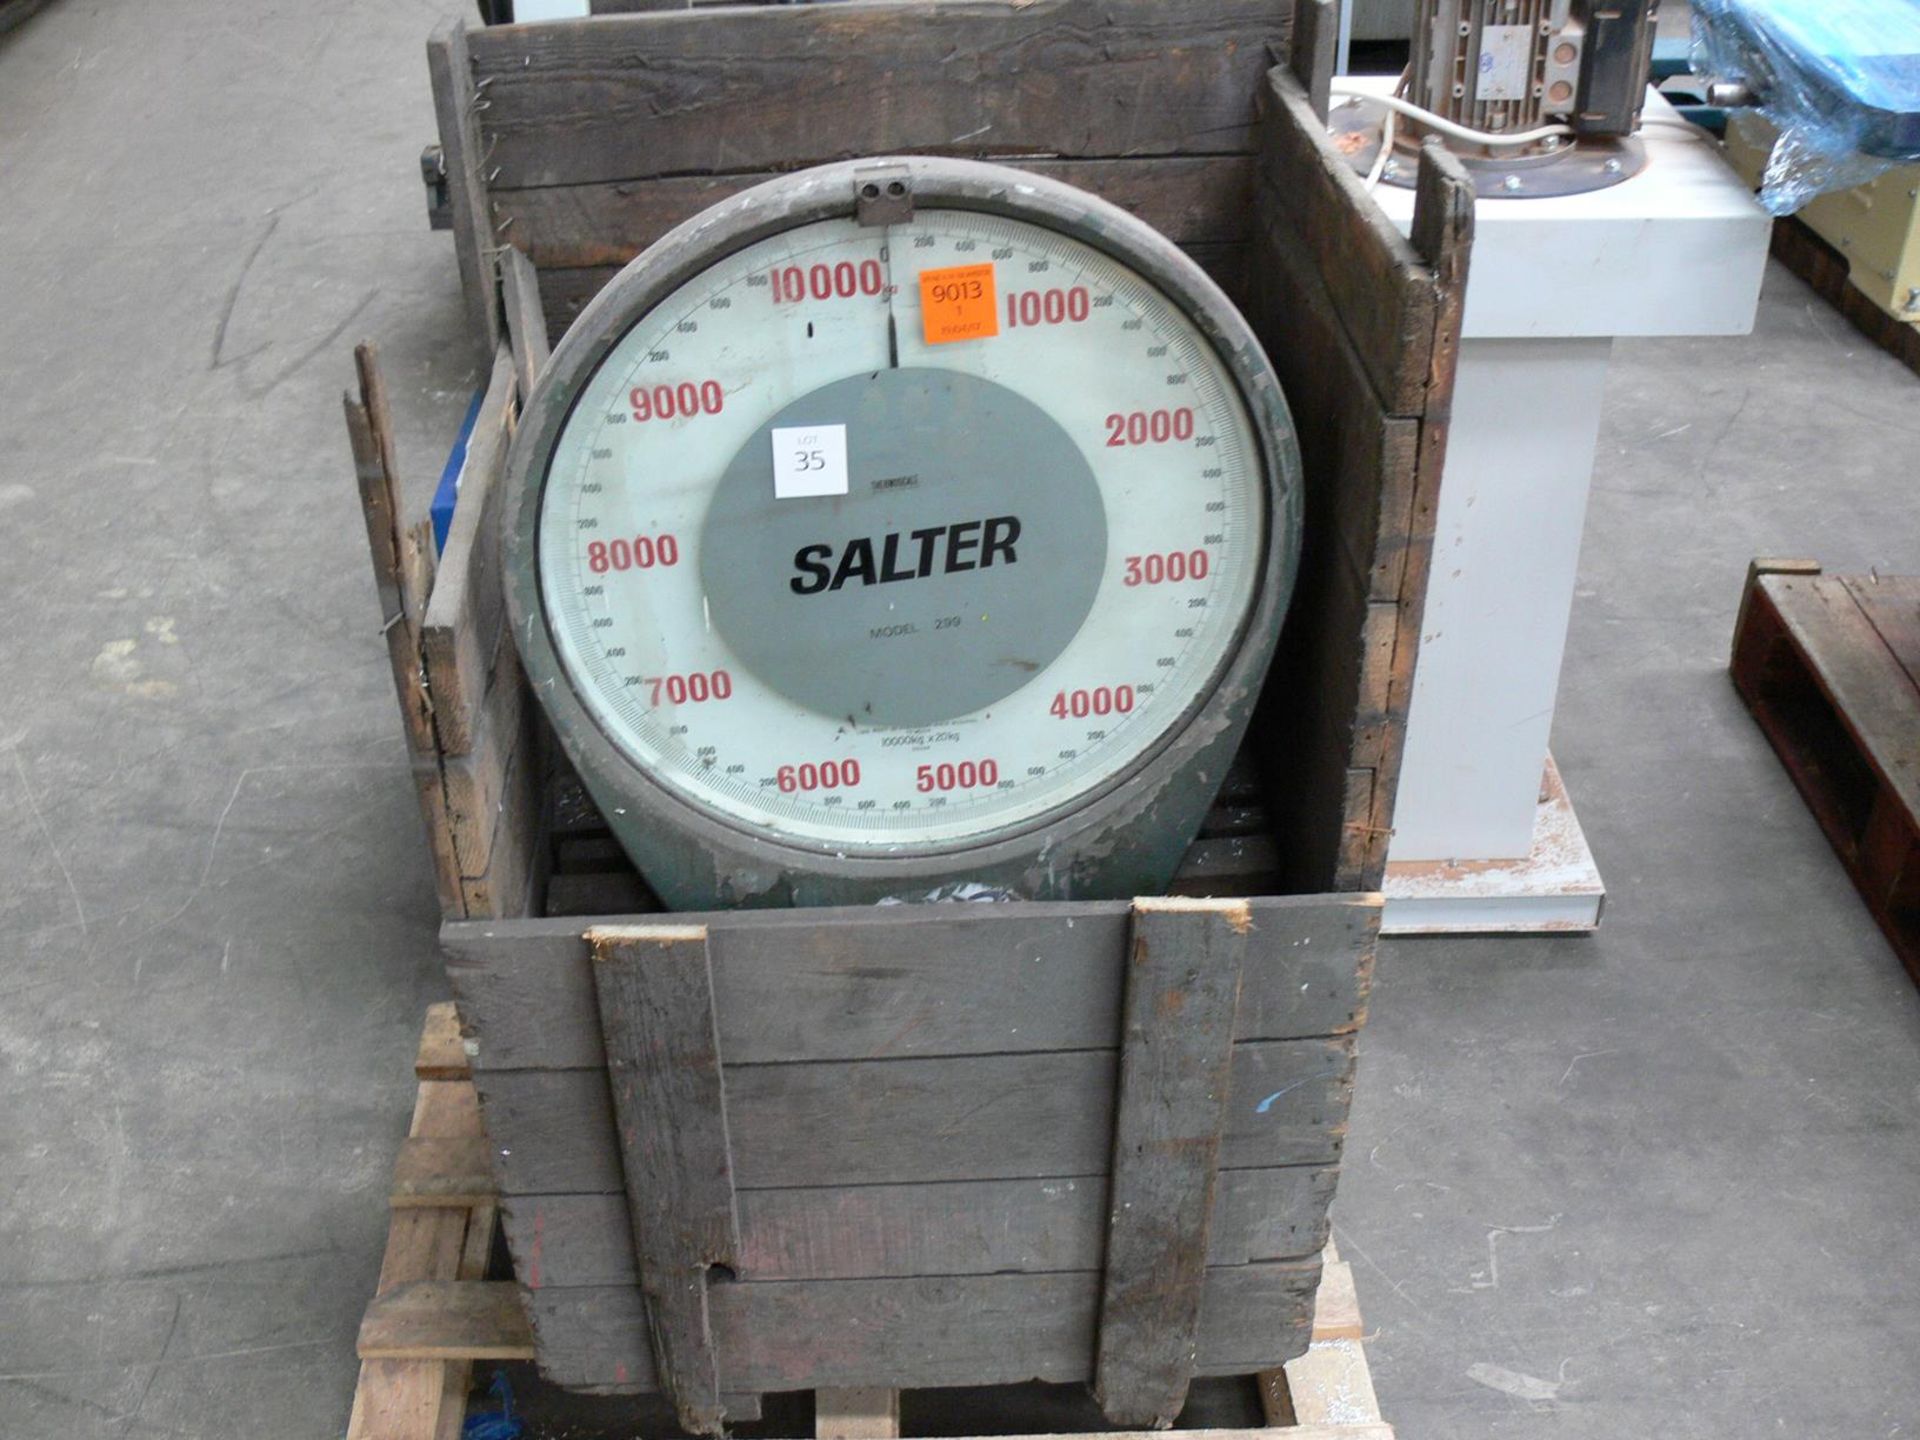 * Salter Overhead Crane Weighing Scale, Max Weight: 10,000Kg. Please note there is a £10 + VAT